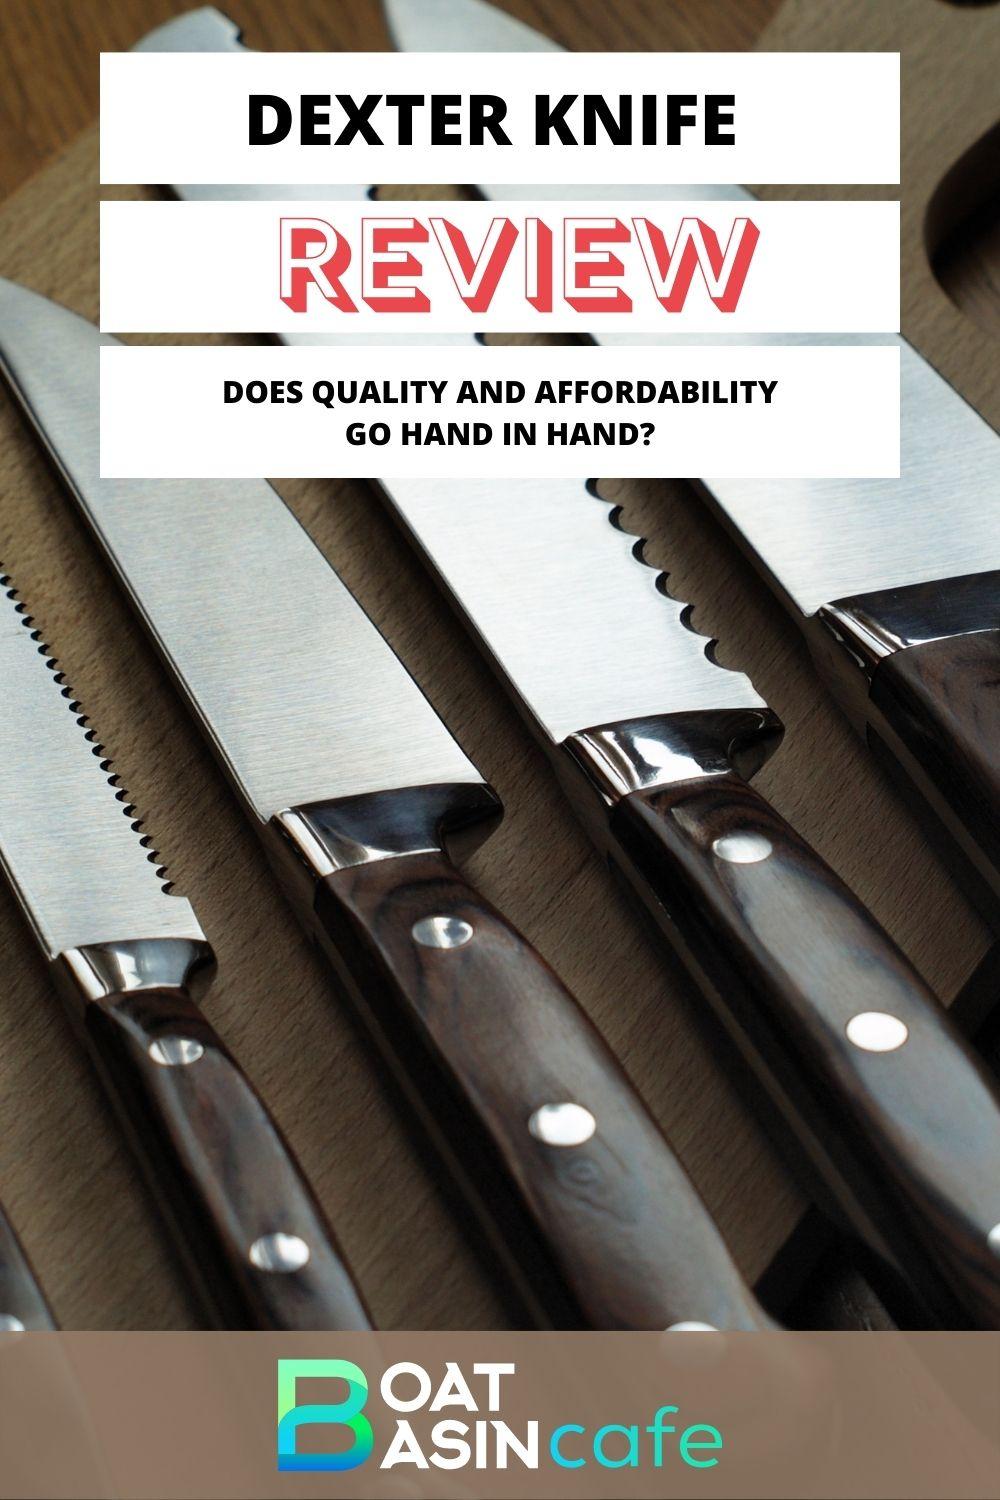 Dexter Knife Review: The Best Cheap Knife You Can Buy?
